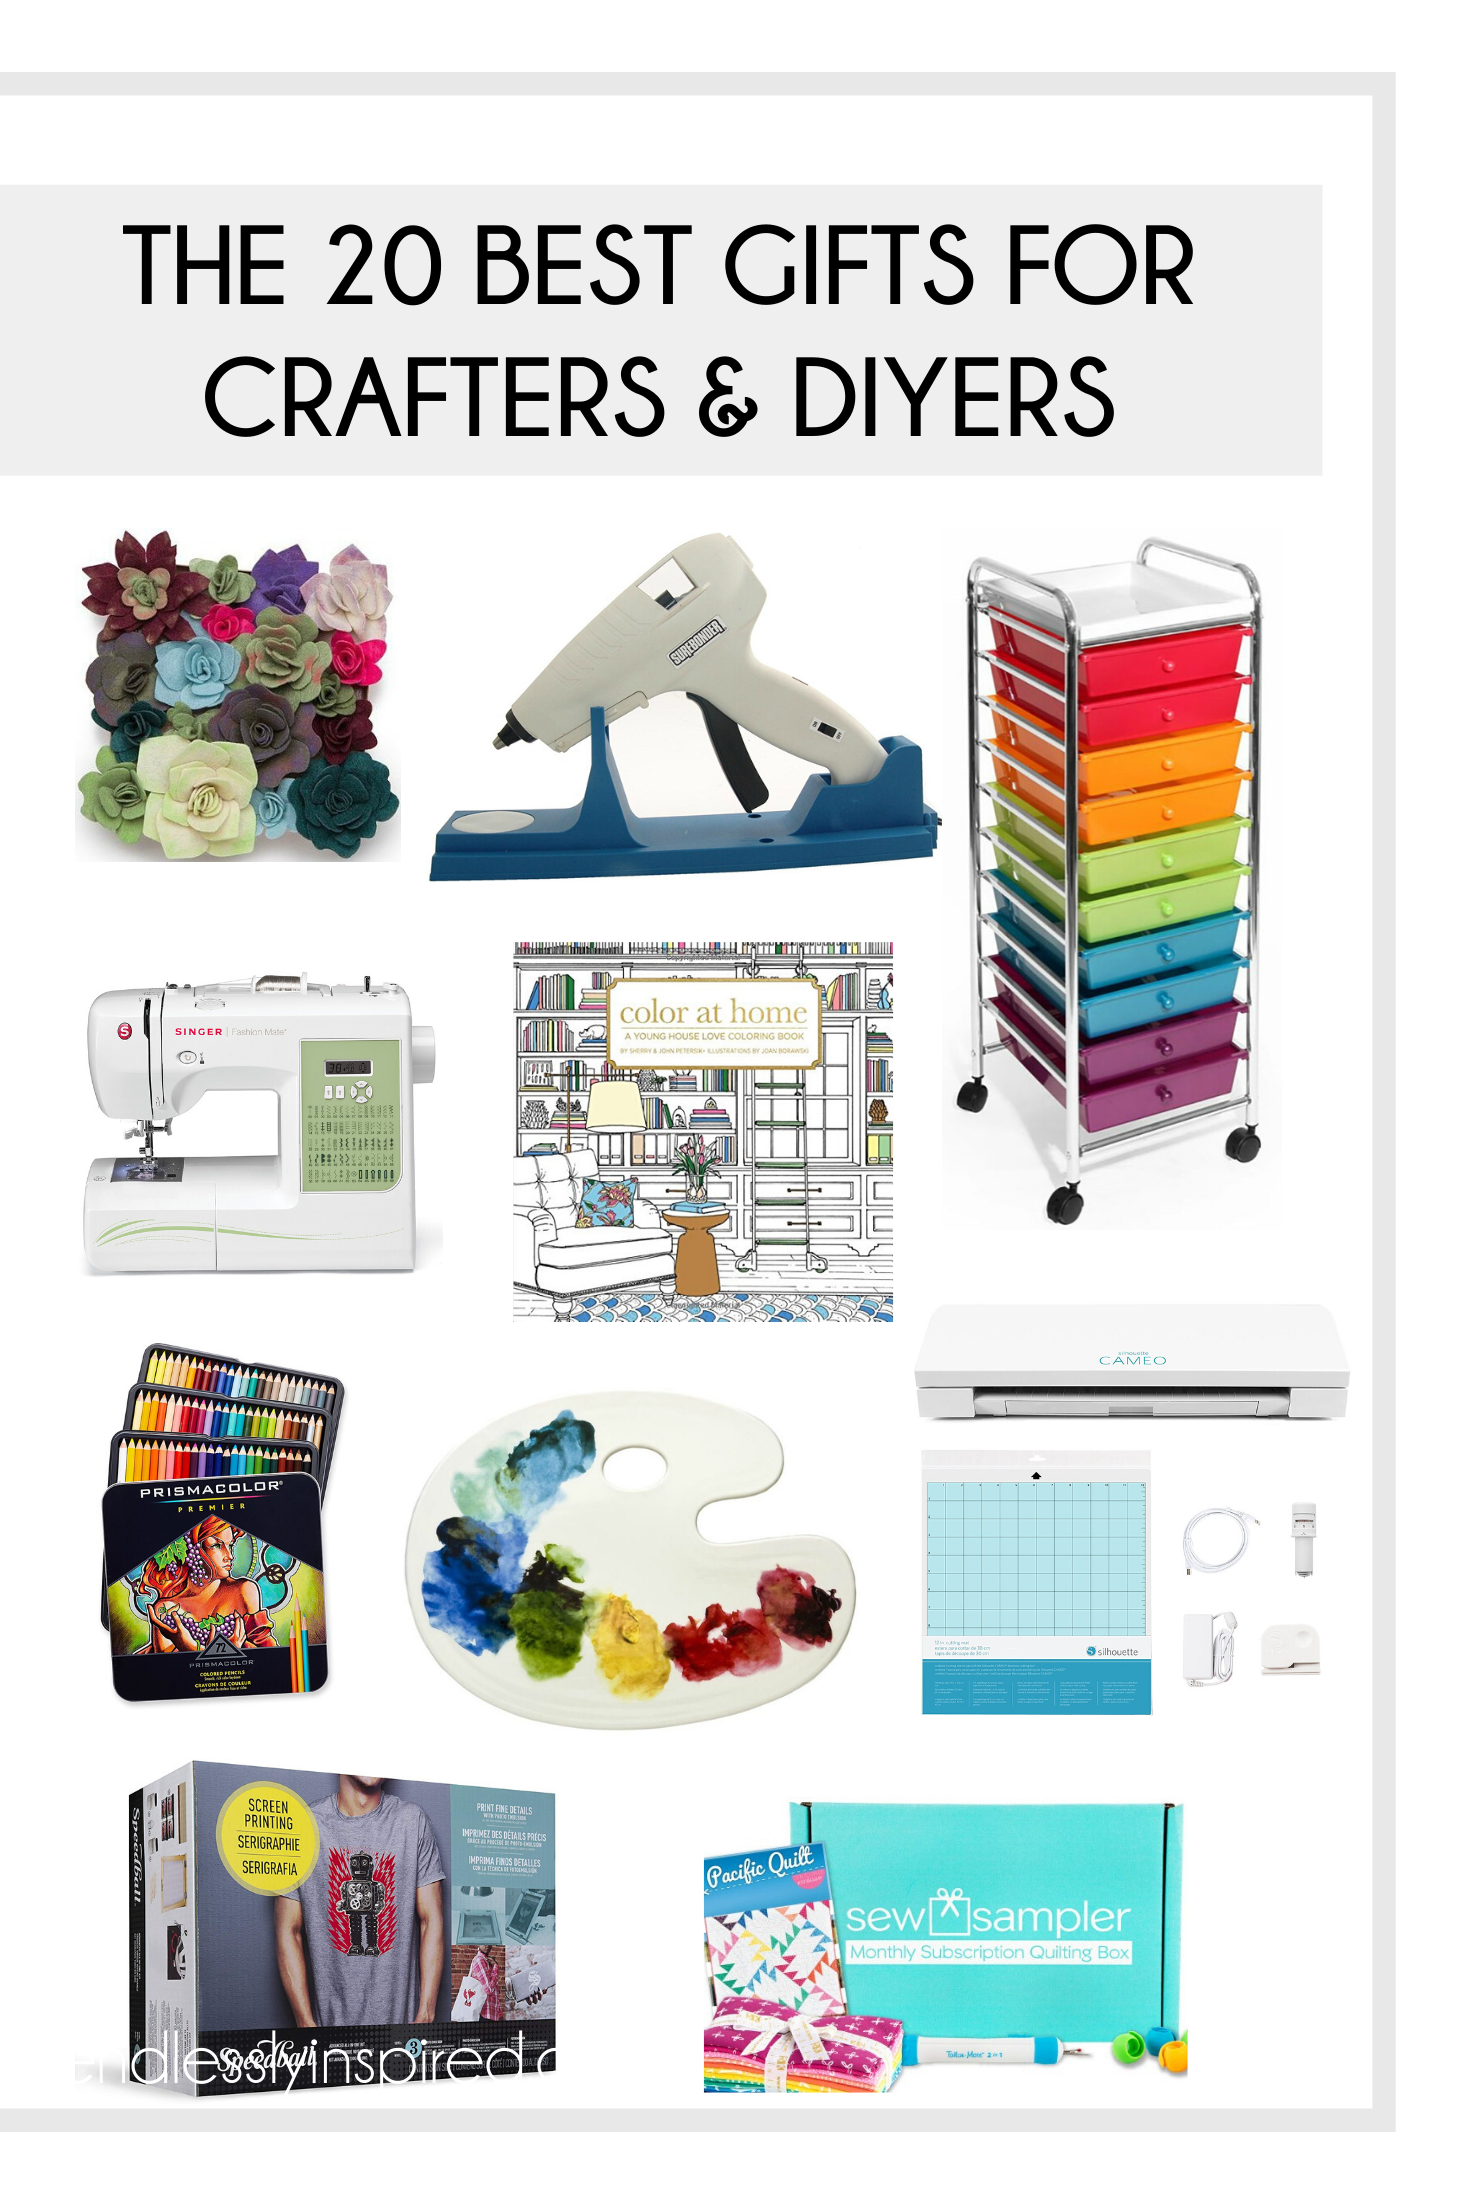 Collage of gifts for crafters and DIYers